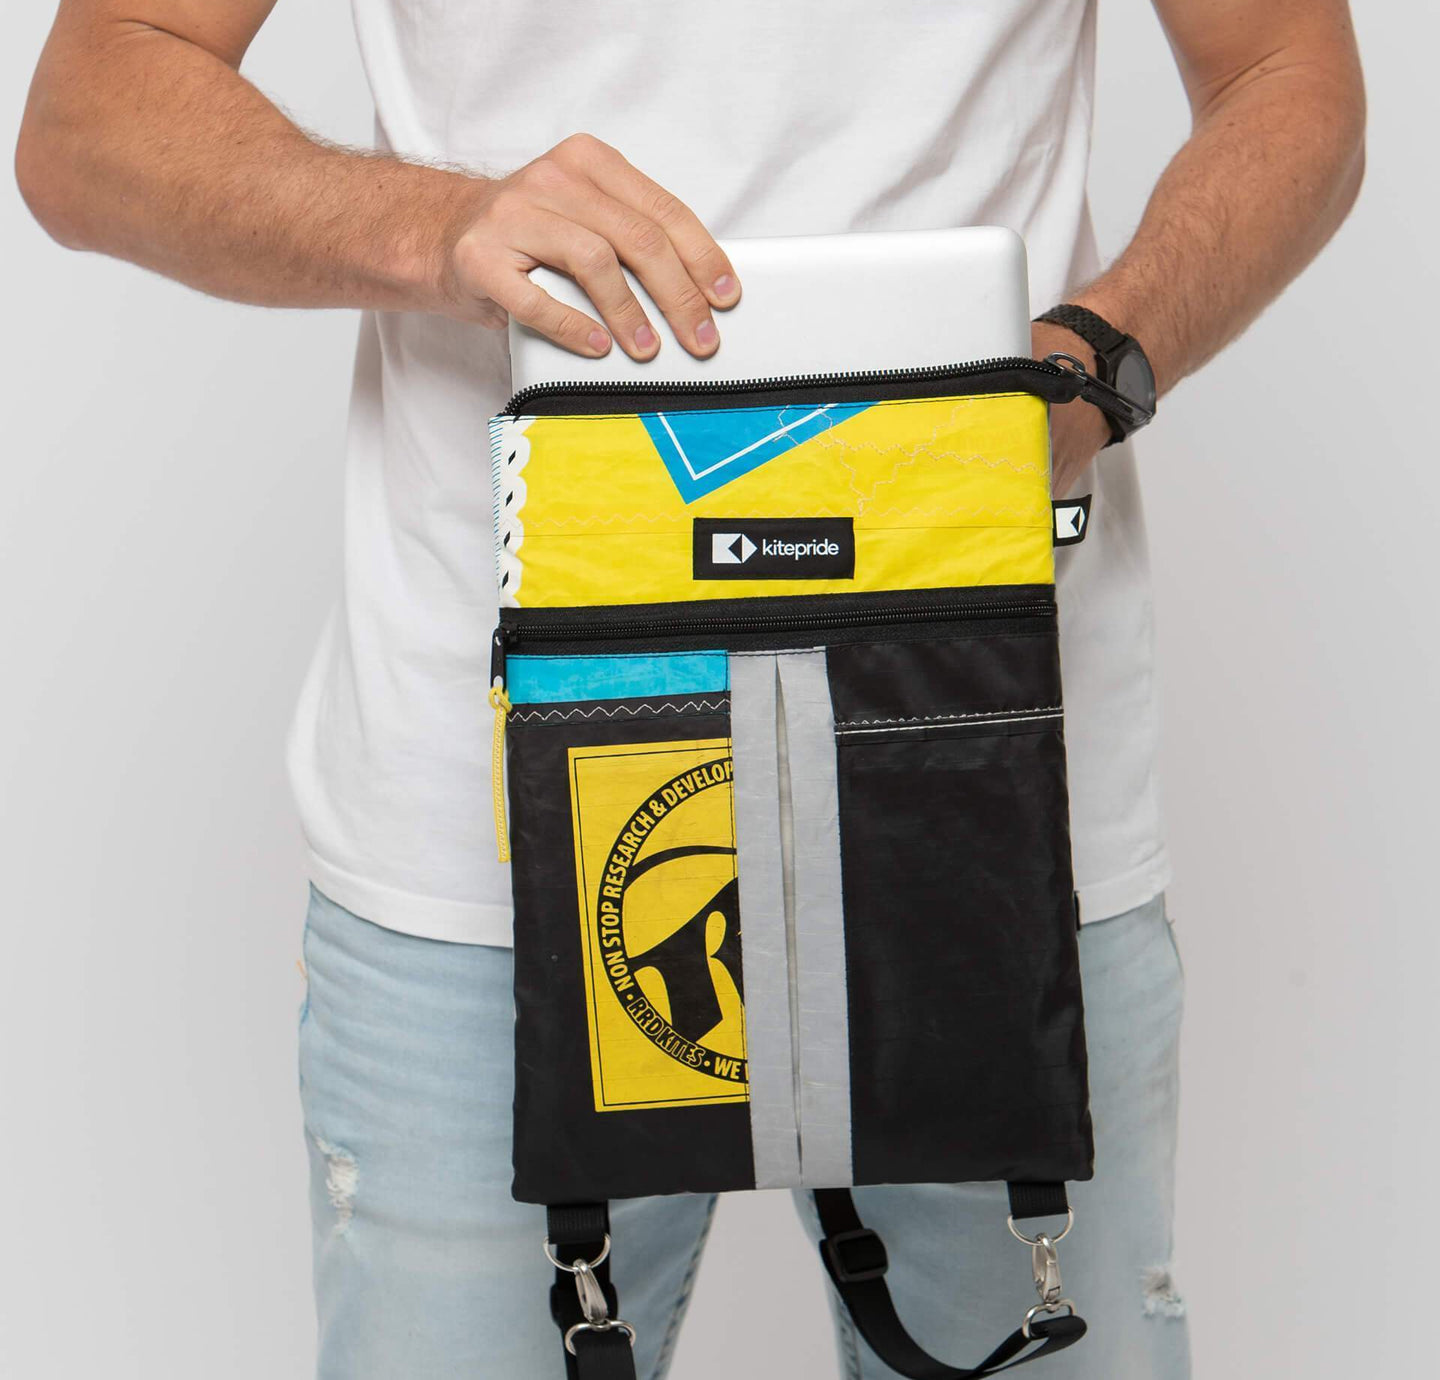 Sandi Laptop Sleeve 13'' with Straps - KitePride Sandi Laptop Sleeve 13'' with Straps - KitePride up-cycled recycled one of a kind fashion bags are repurposed from kitesurfing kite. Each bag 